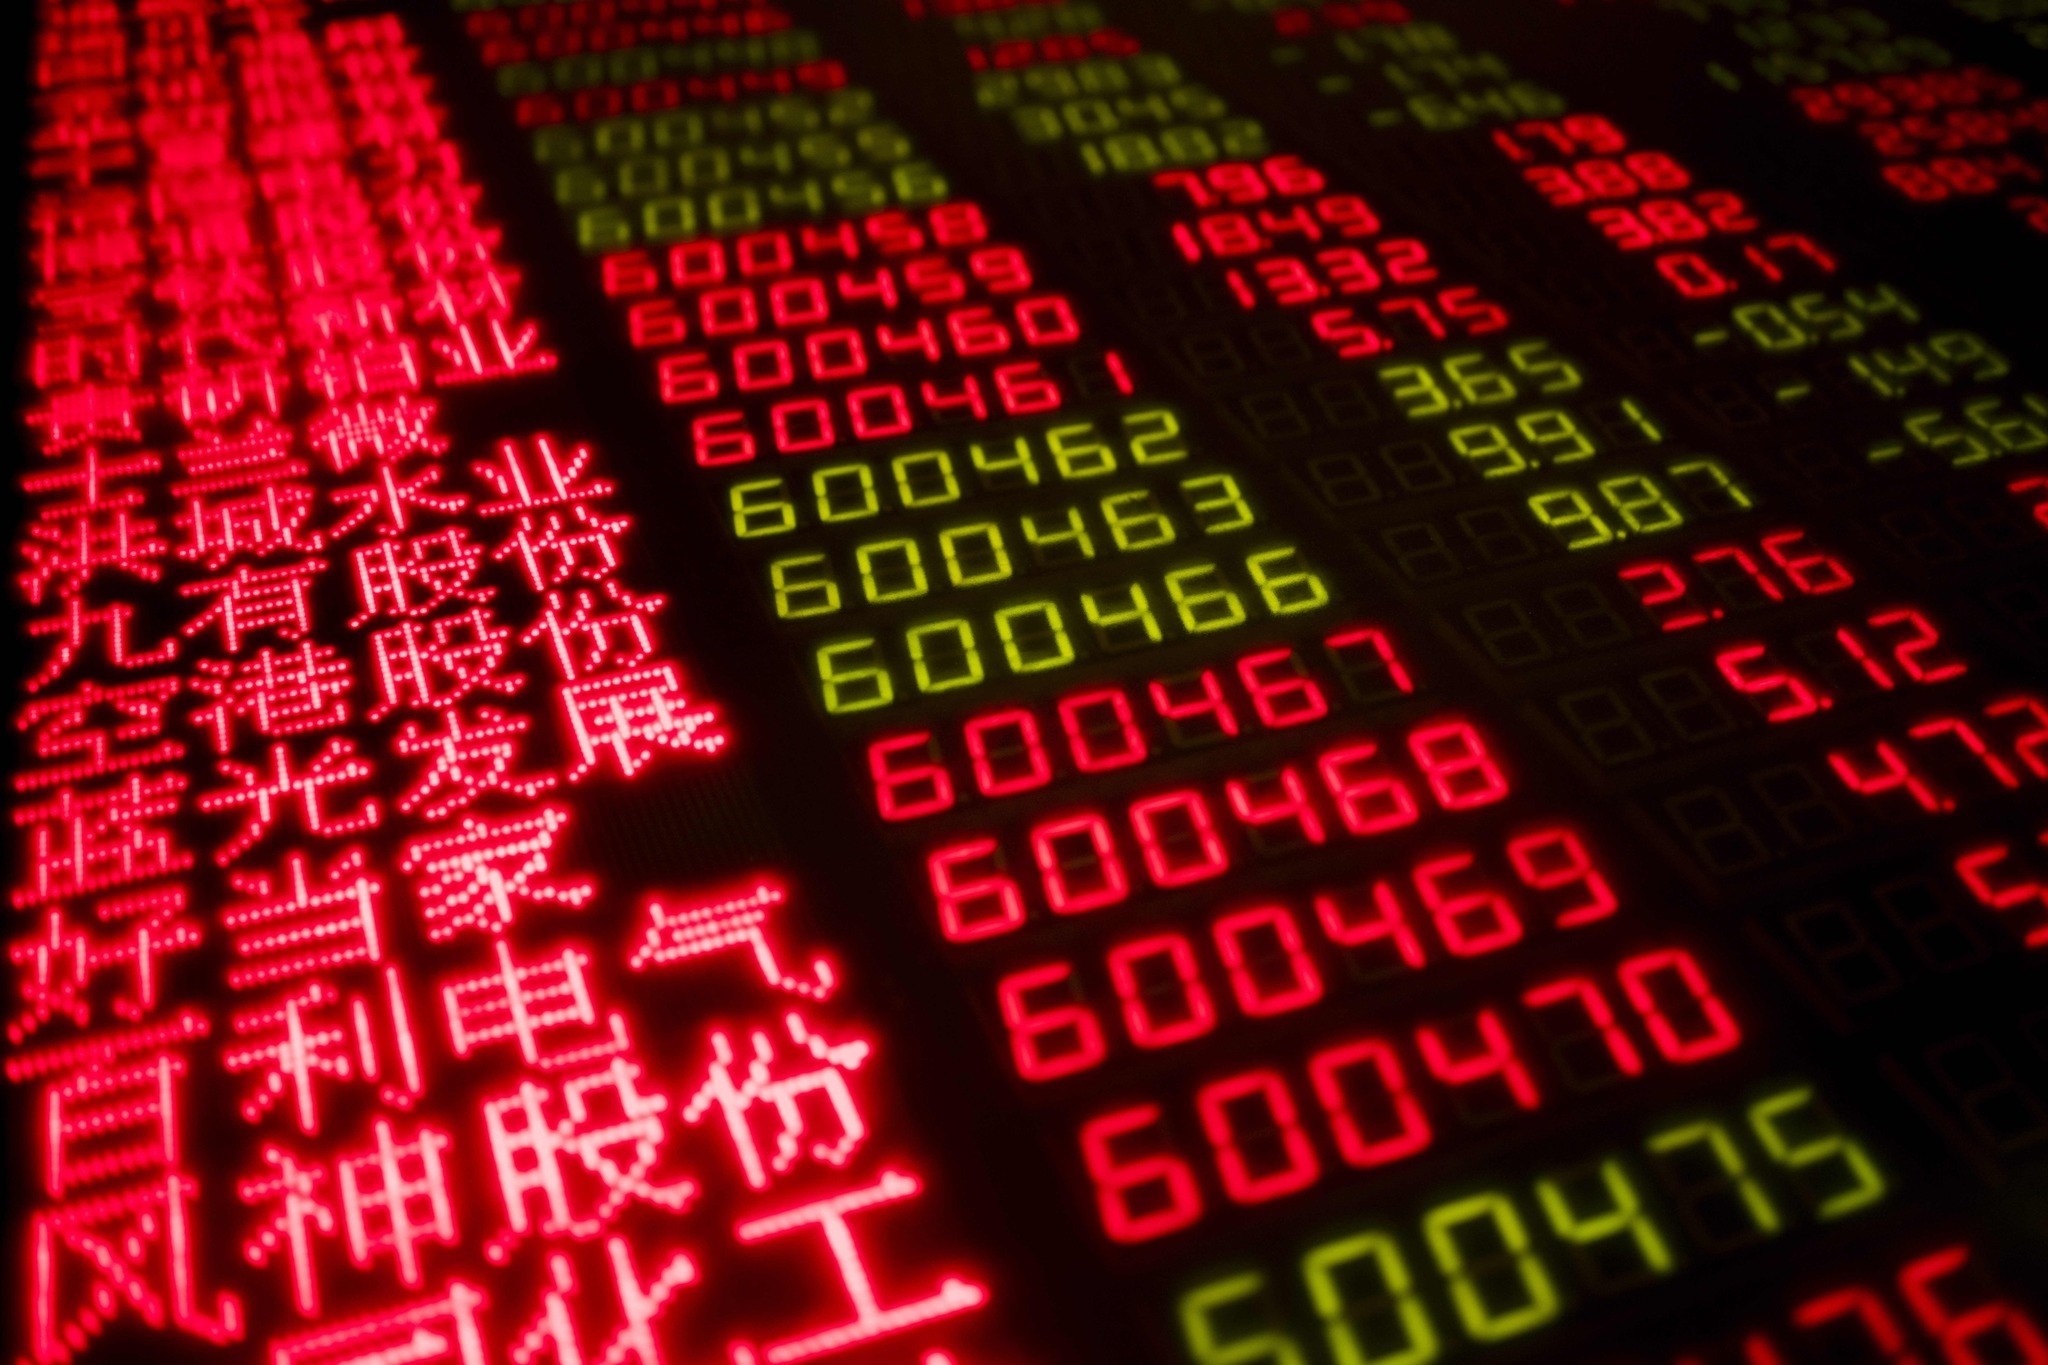 Stock price movements are seen on a screen at a securities company in Beijing on February 7, 2018. (AFP Photo)